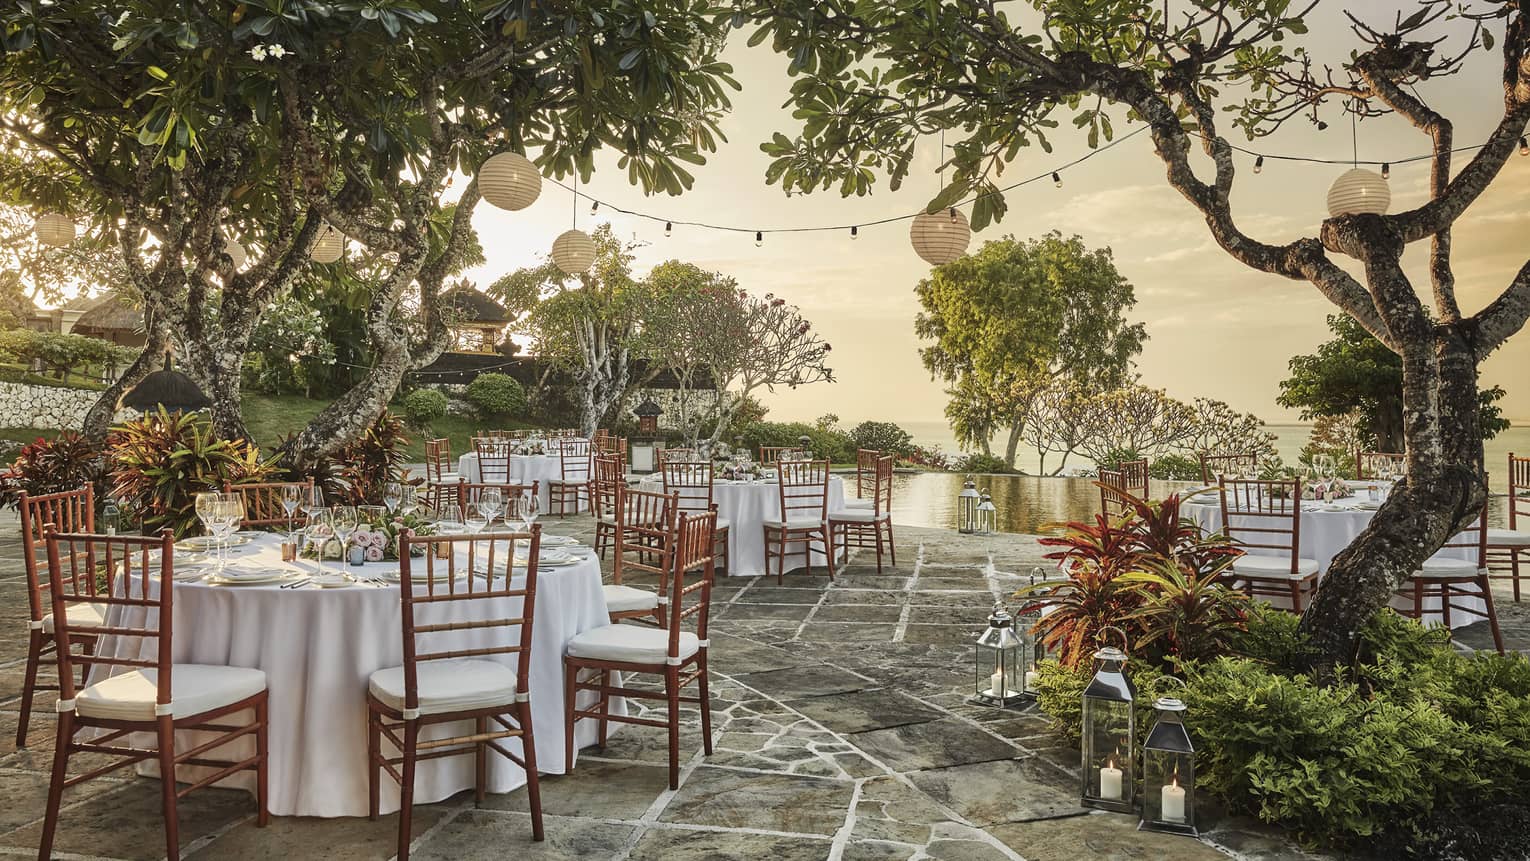 Patio wedding reception at sunset, small round banquet tables and chairs under trees